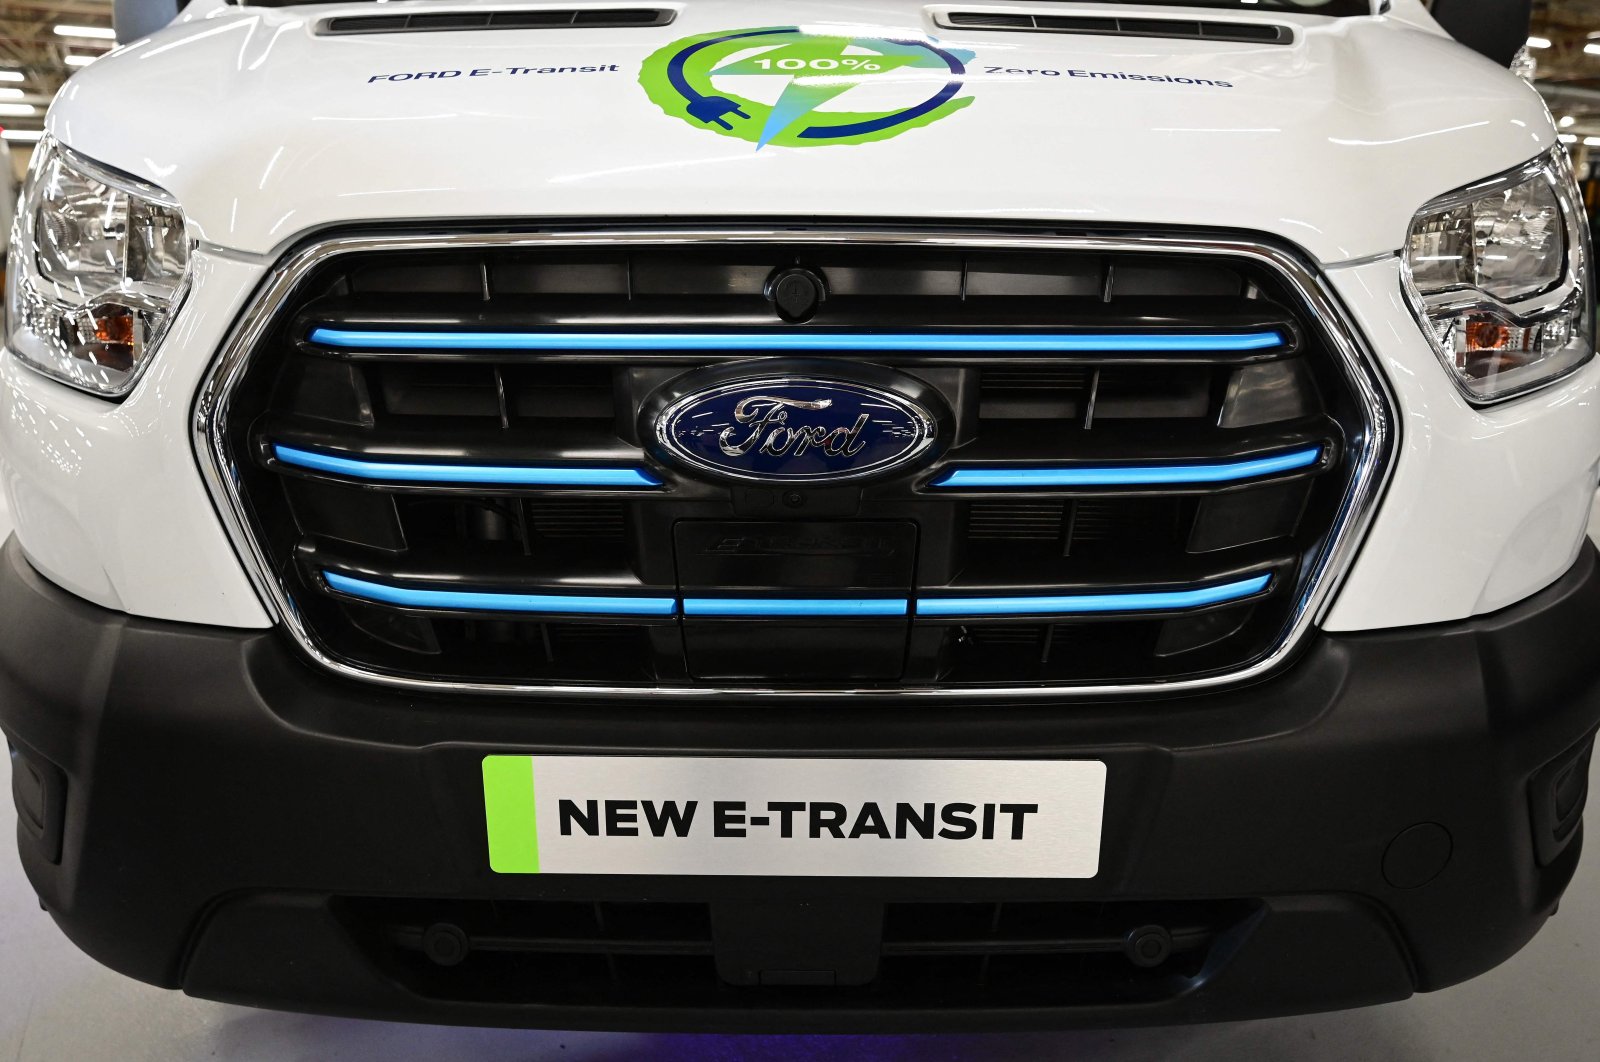 A Ford E-Transit van is seen on display at the Ford Halewood plant in Liverpool, U.K., Oct. 18, 2021. (AFP Photo)